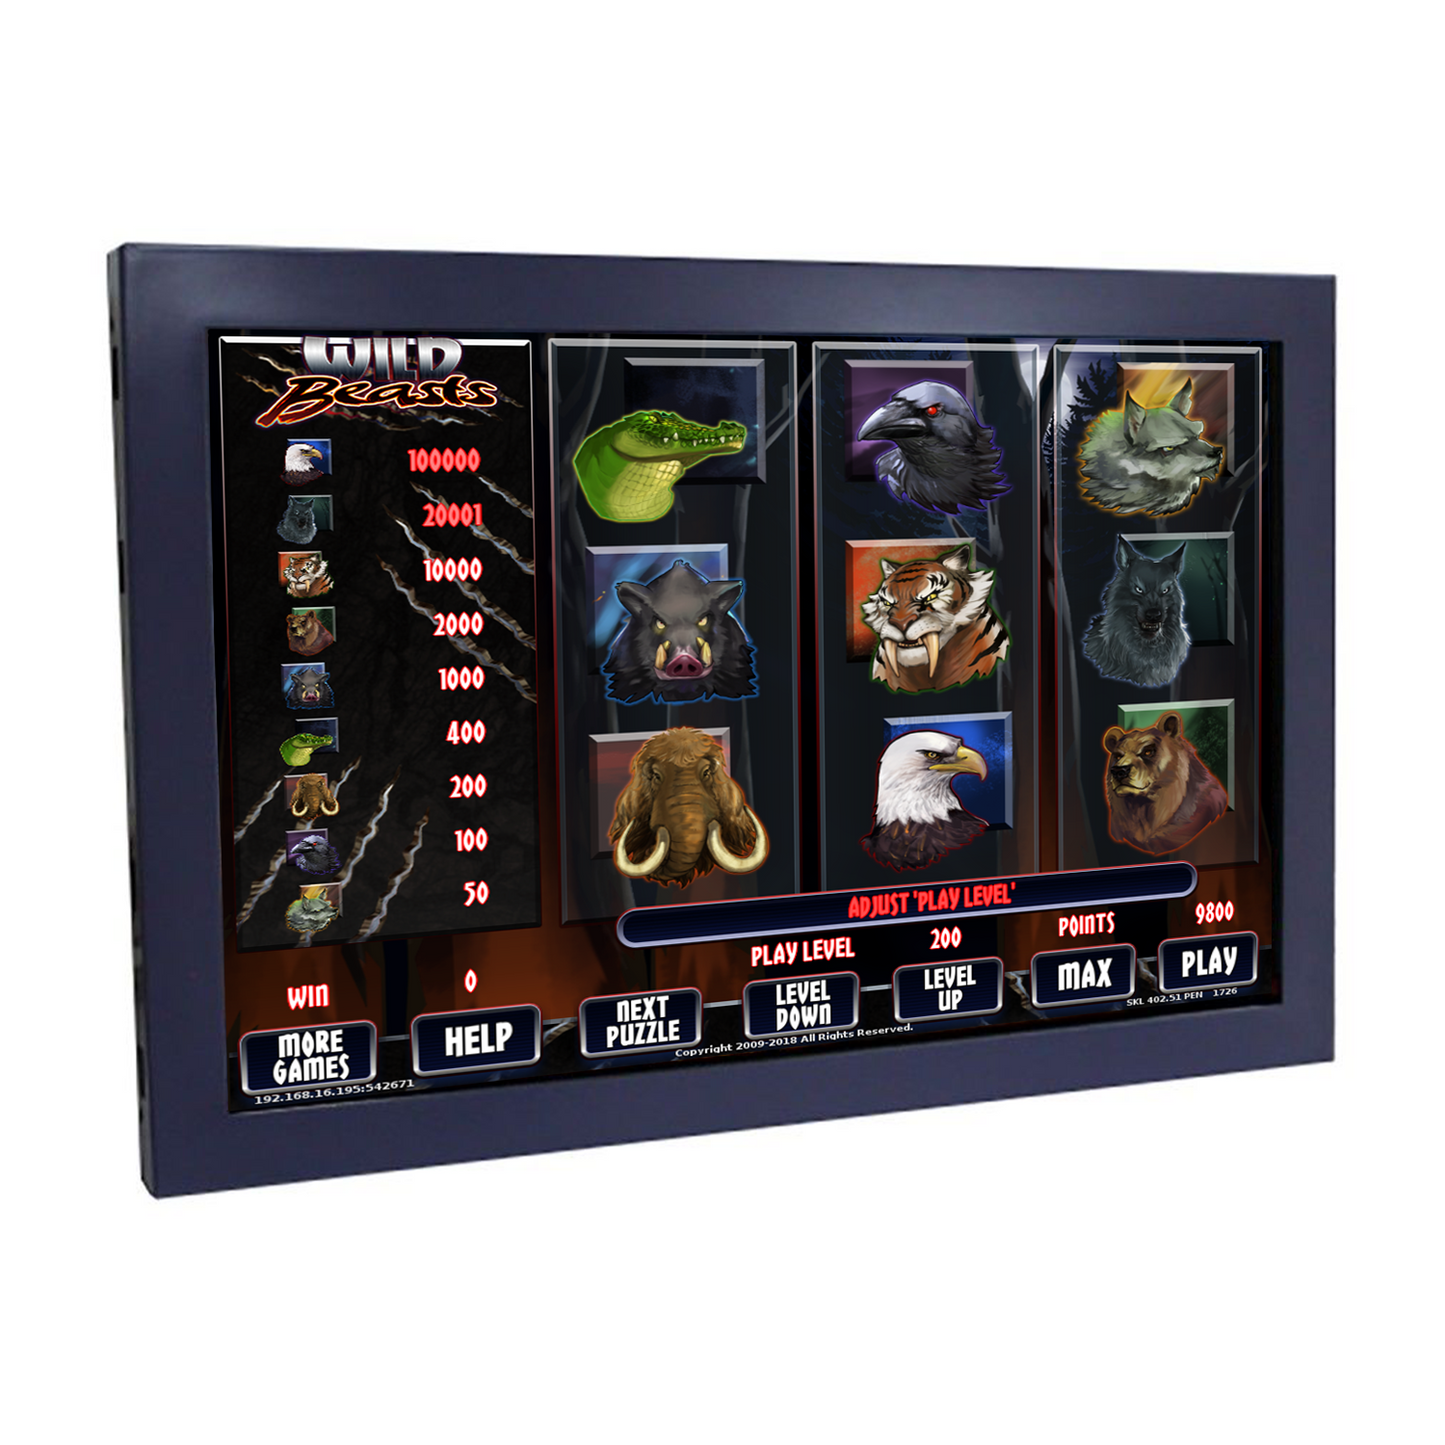 Sold by Miele Manufacturing (Miele MFG). 22” New Goldfinger Monitor, bundle and save! Buy a minimum of three (3) 22” New Goldfinger Monitors and get 20% off each new 22” monitor! Compatible with PA Skill Centurion, Spartan, and Rangers. PA Skill is powered by Pace-O-Matic (POM) and built by Miele Manufacturing (Miele MFG).